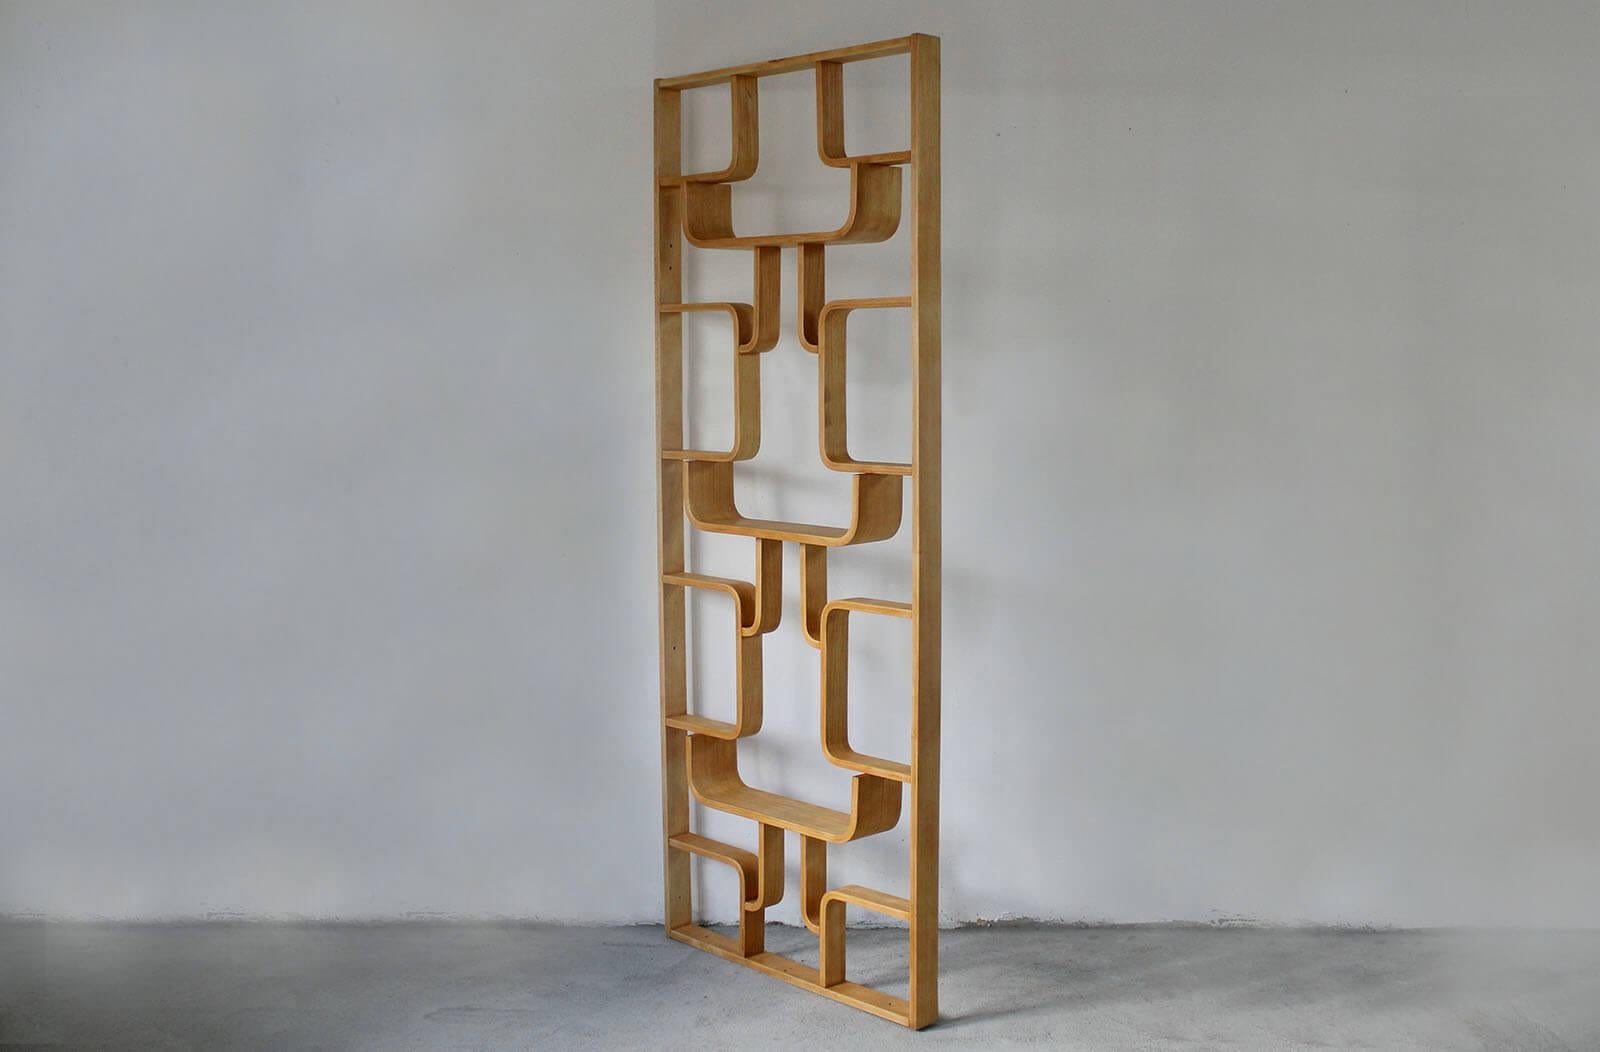 Midcentury Wall Unit in bent plywood designed by Ludvik Volak, produced by Drevopodnik Holesov in1960s. A memorable design of Mr. Volak, yet still very fresh and modern piece. This object can be used as a shelving unit or room divider, flowers